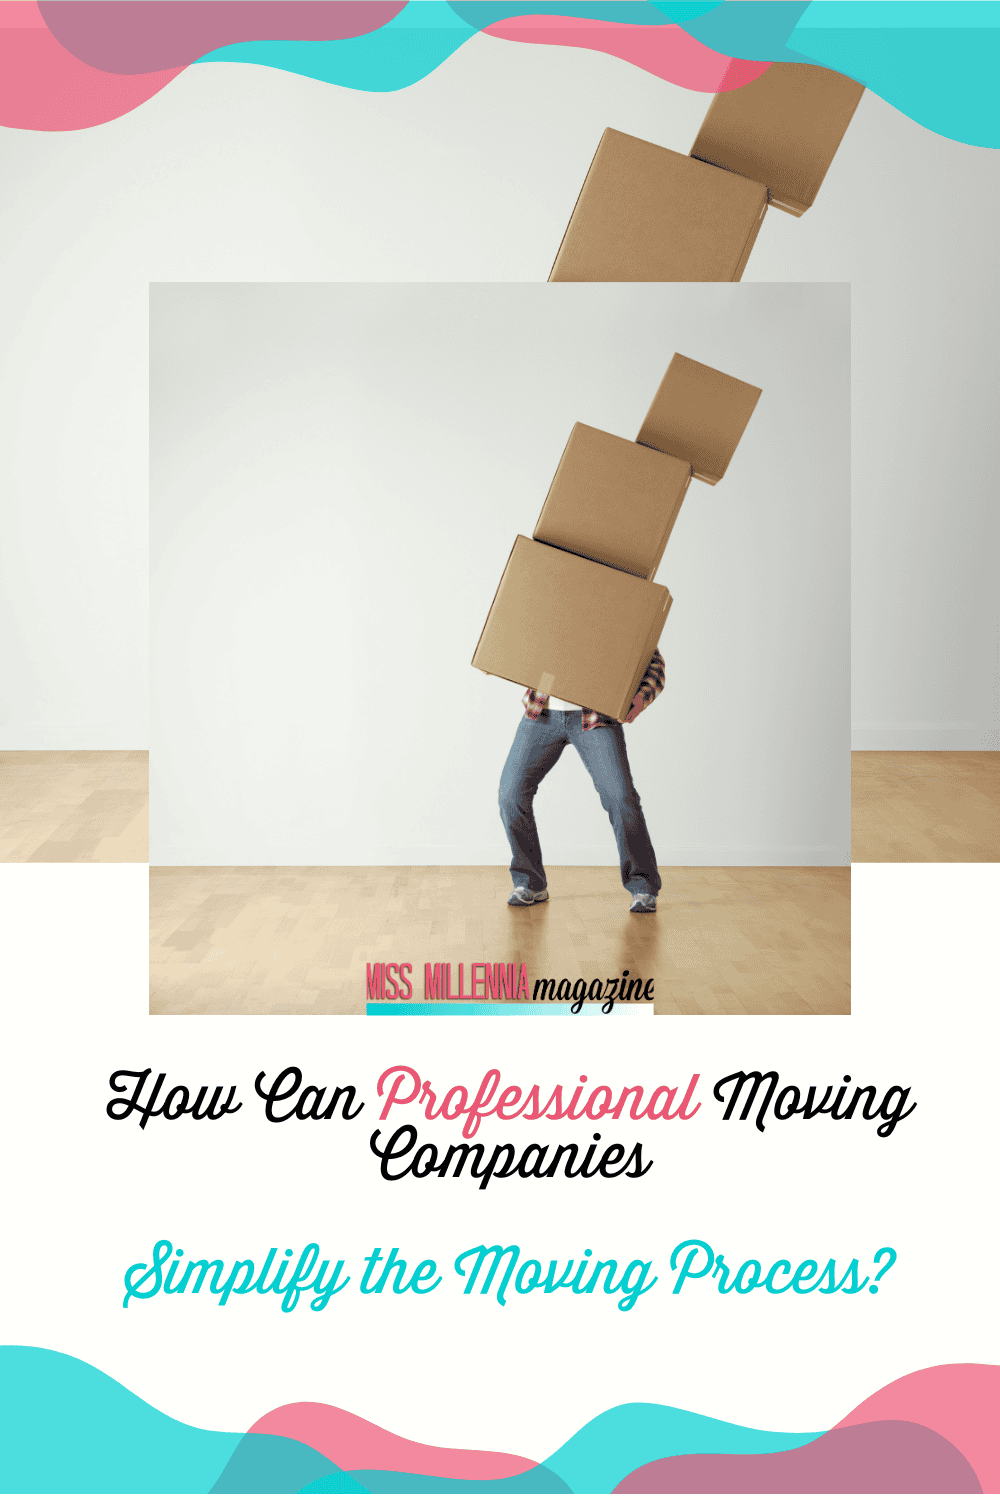 How Can Professional Moving Companies Simplify the Moving Process?